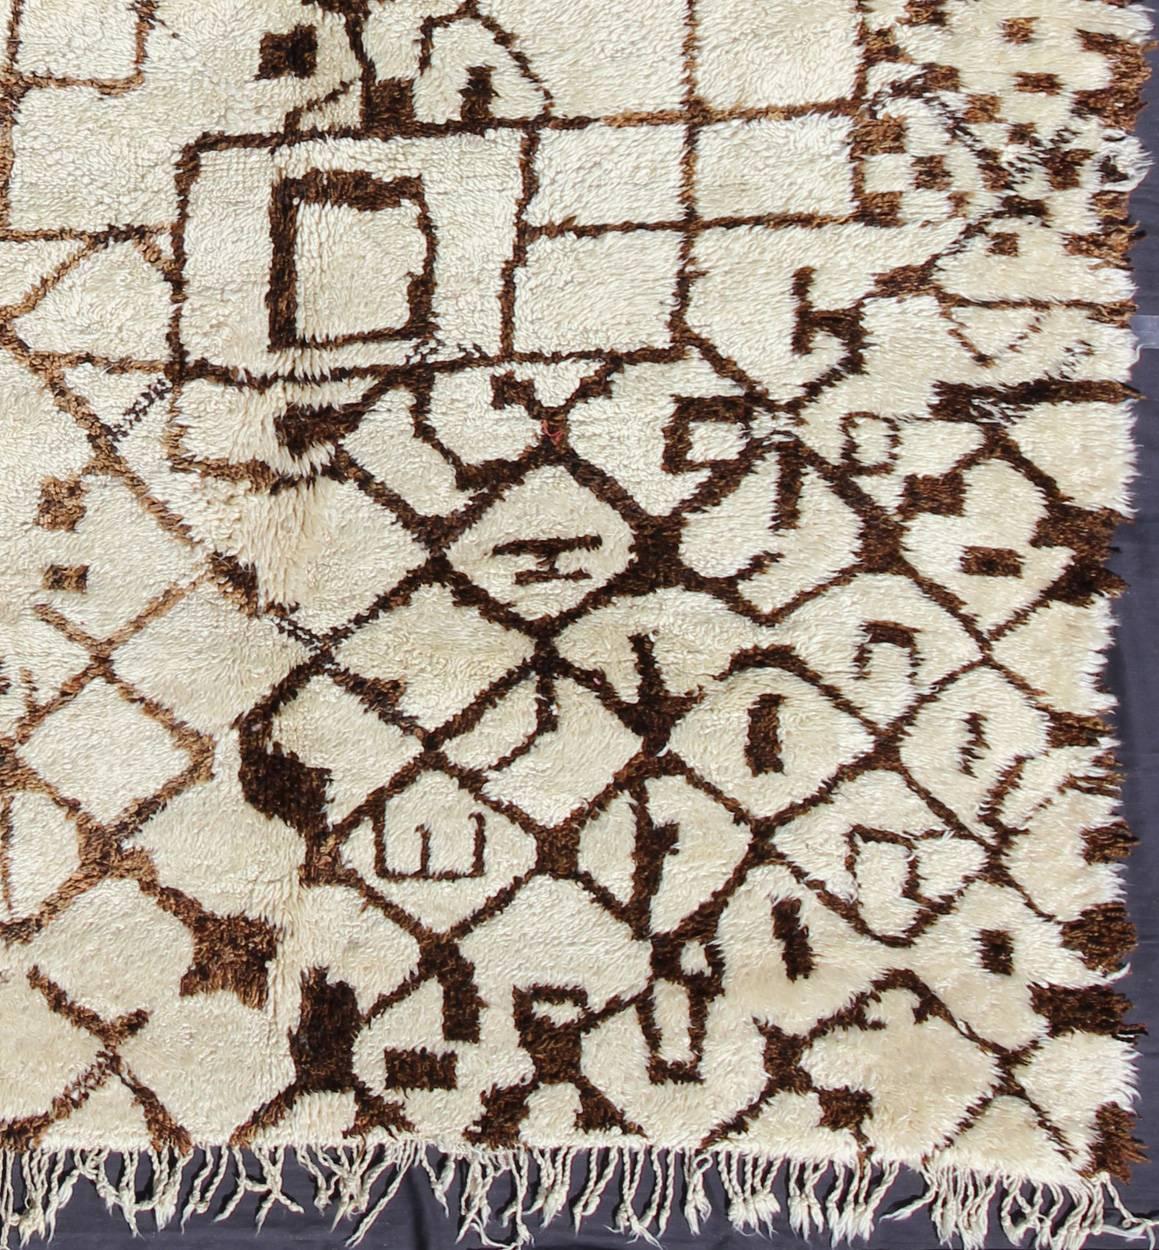 Measures: 7'5'' x 13'7''.
This fabulously complex and interesting carpet features principally lozenge-based designs with a lattice flanked by checkered and diamond shapes filled in with lozenges with extended sides (The lozenge is a classical female